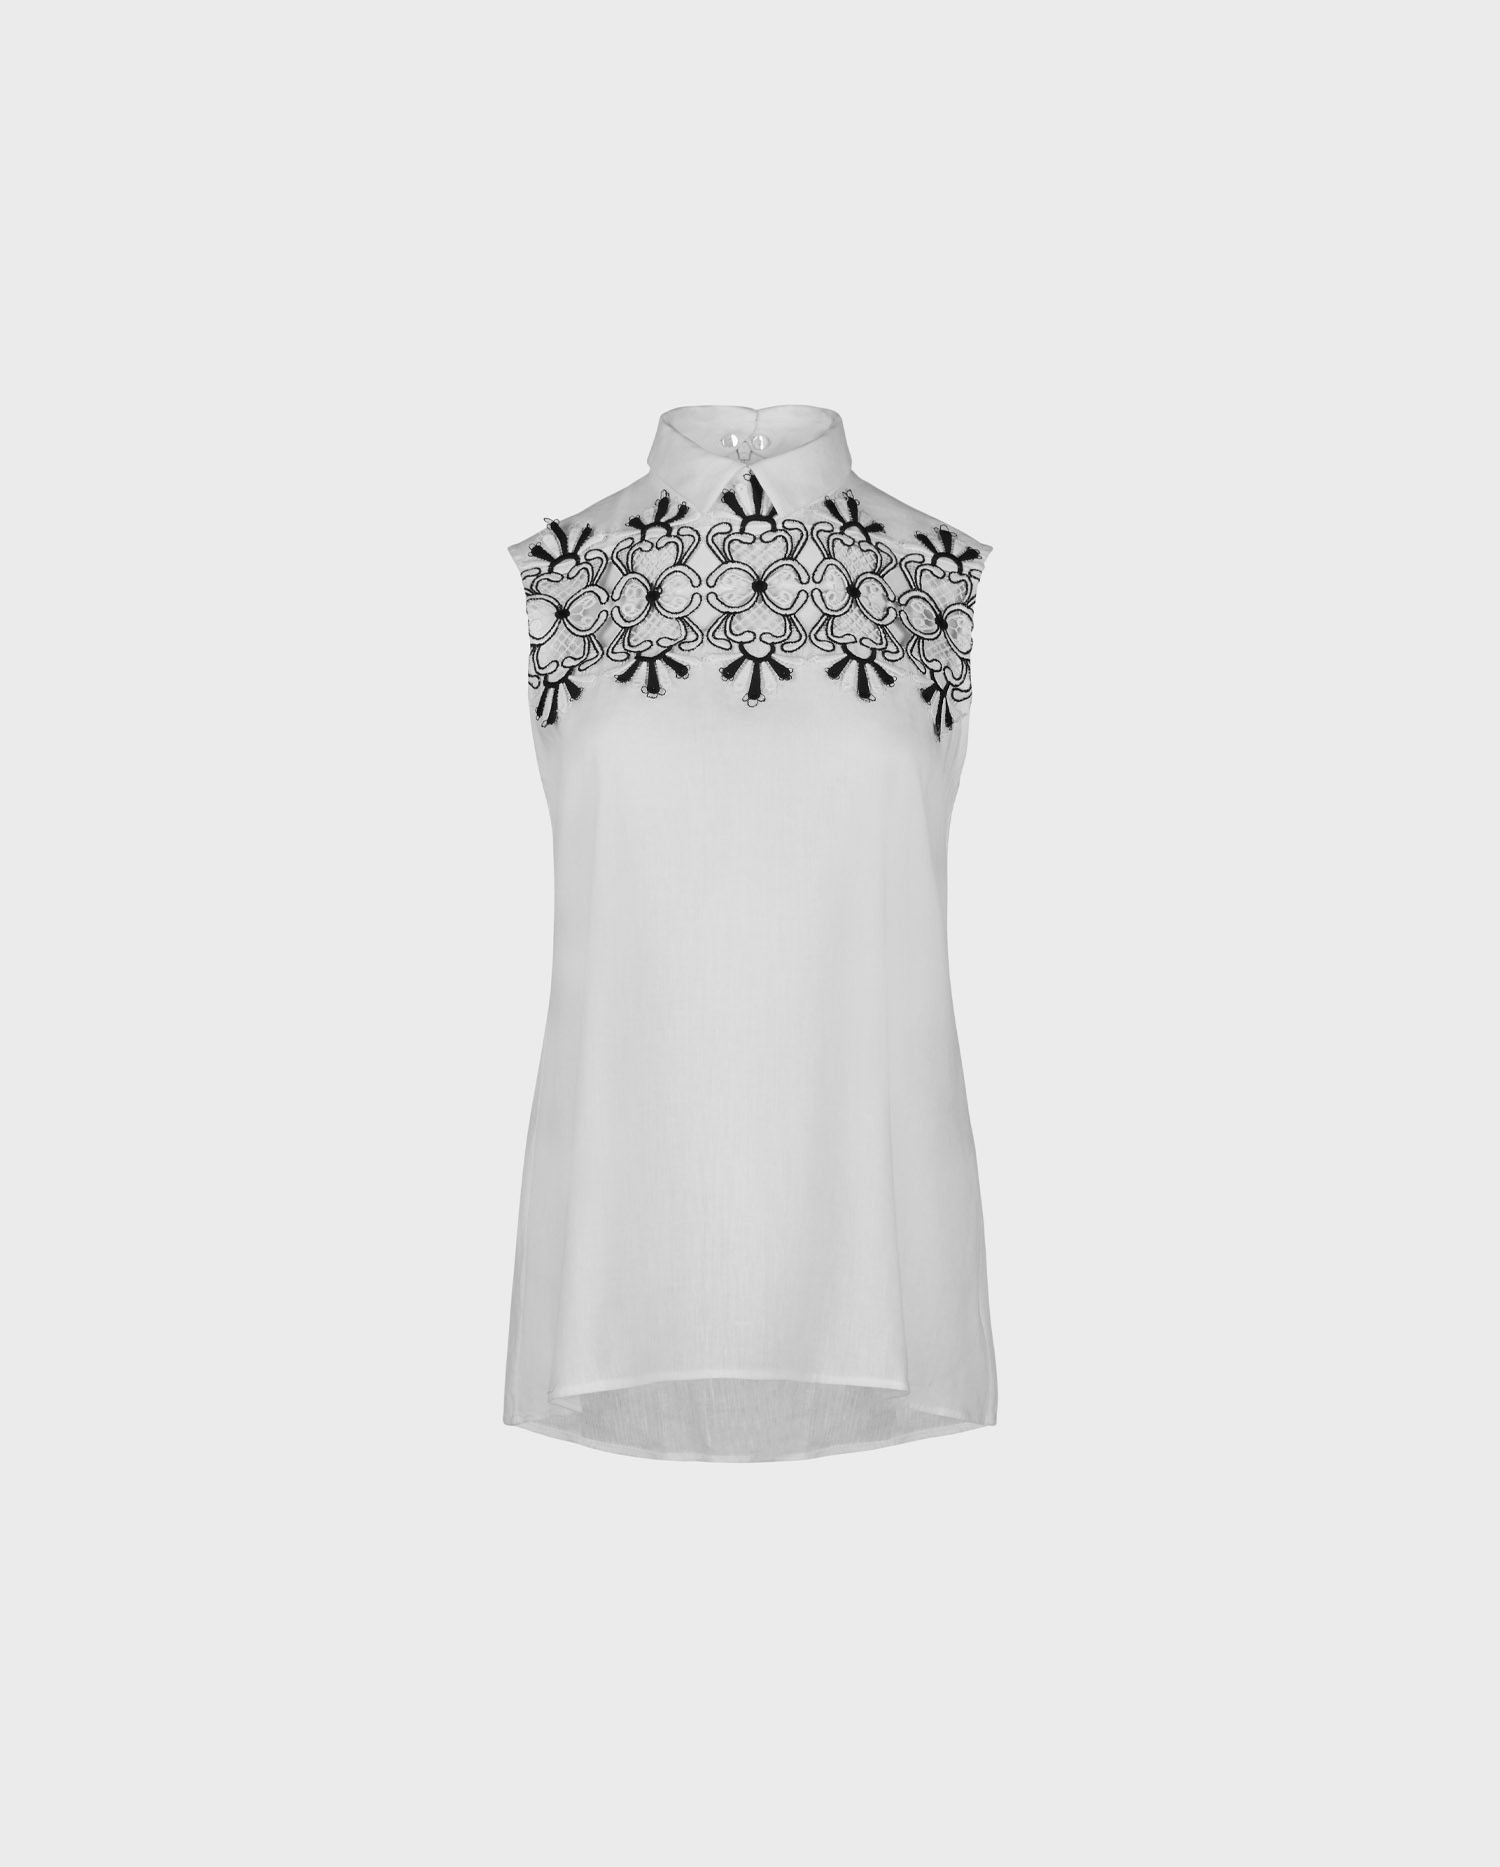 Discover The LAUBURU White linen sleeveless blouse with floral-embroidered details from ANNE FONTAINE